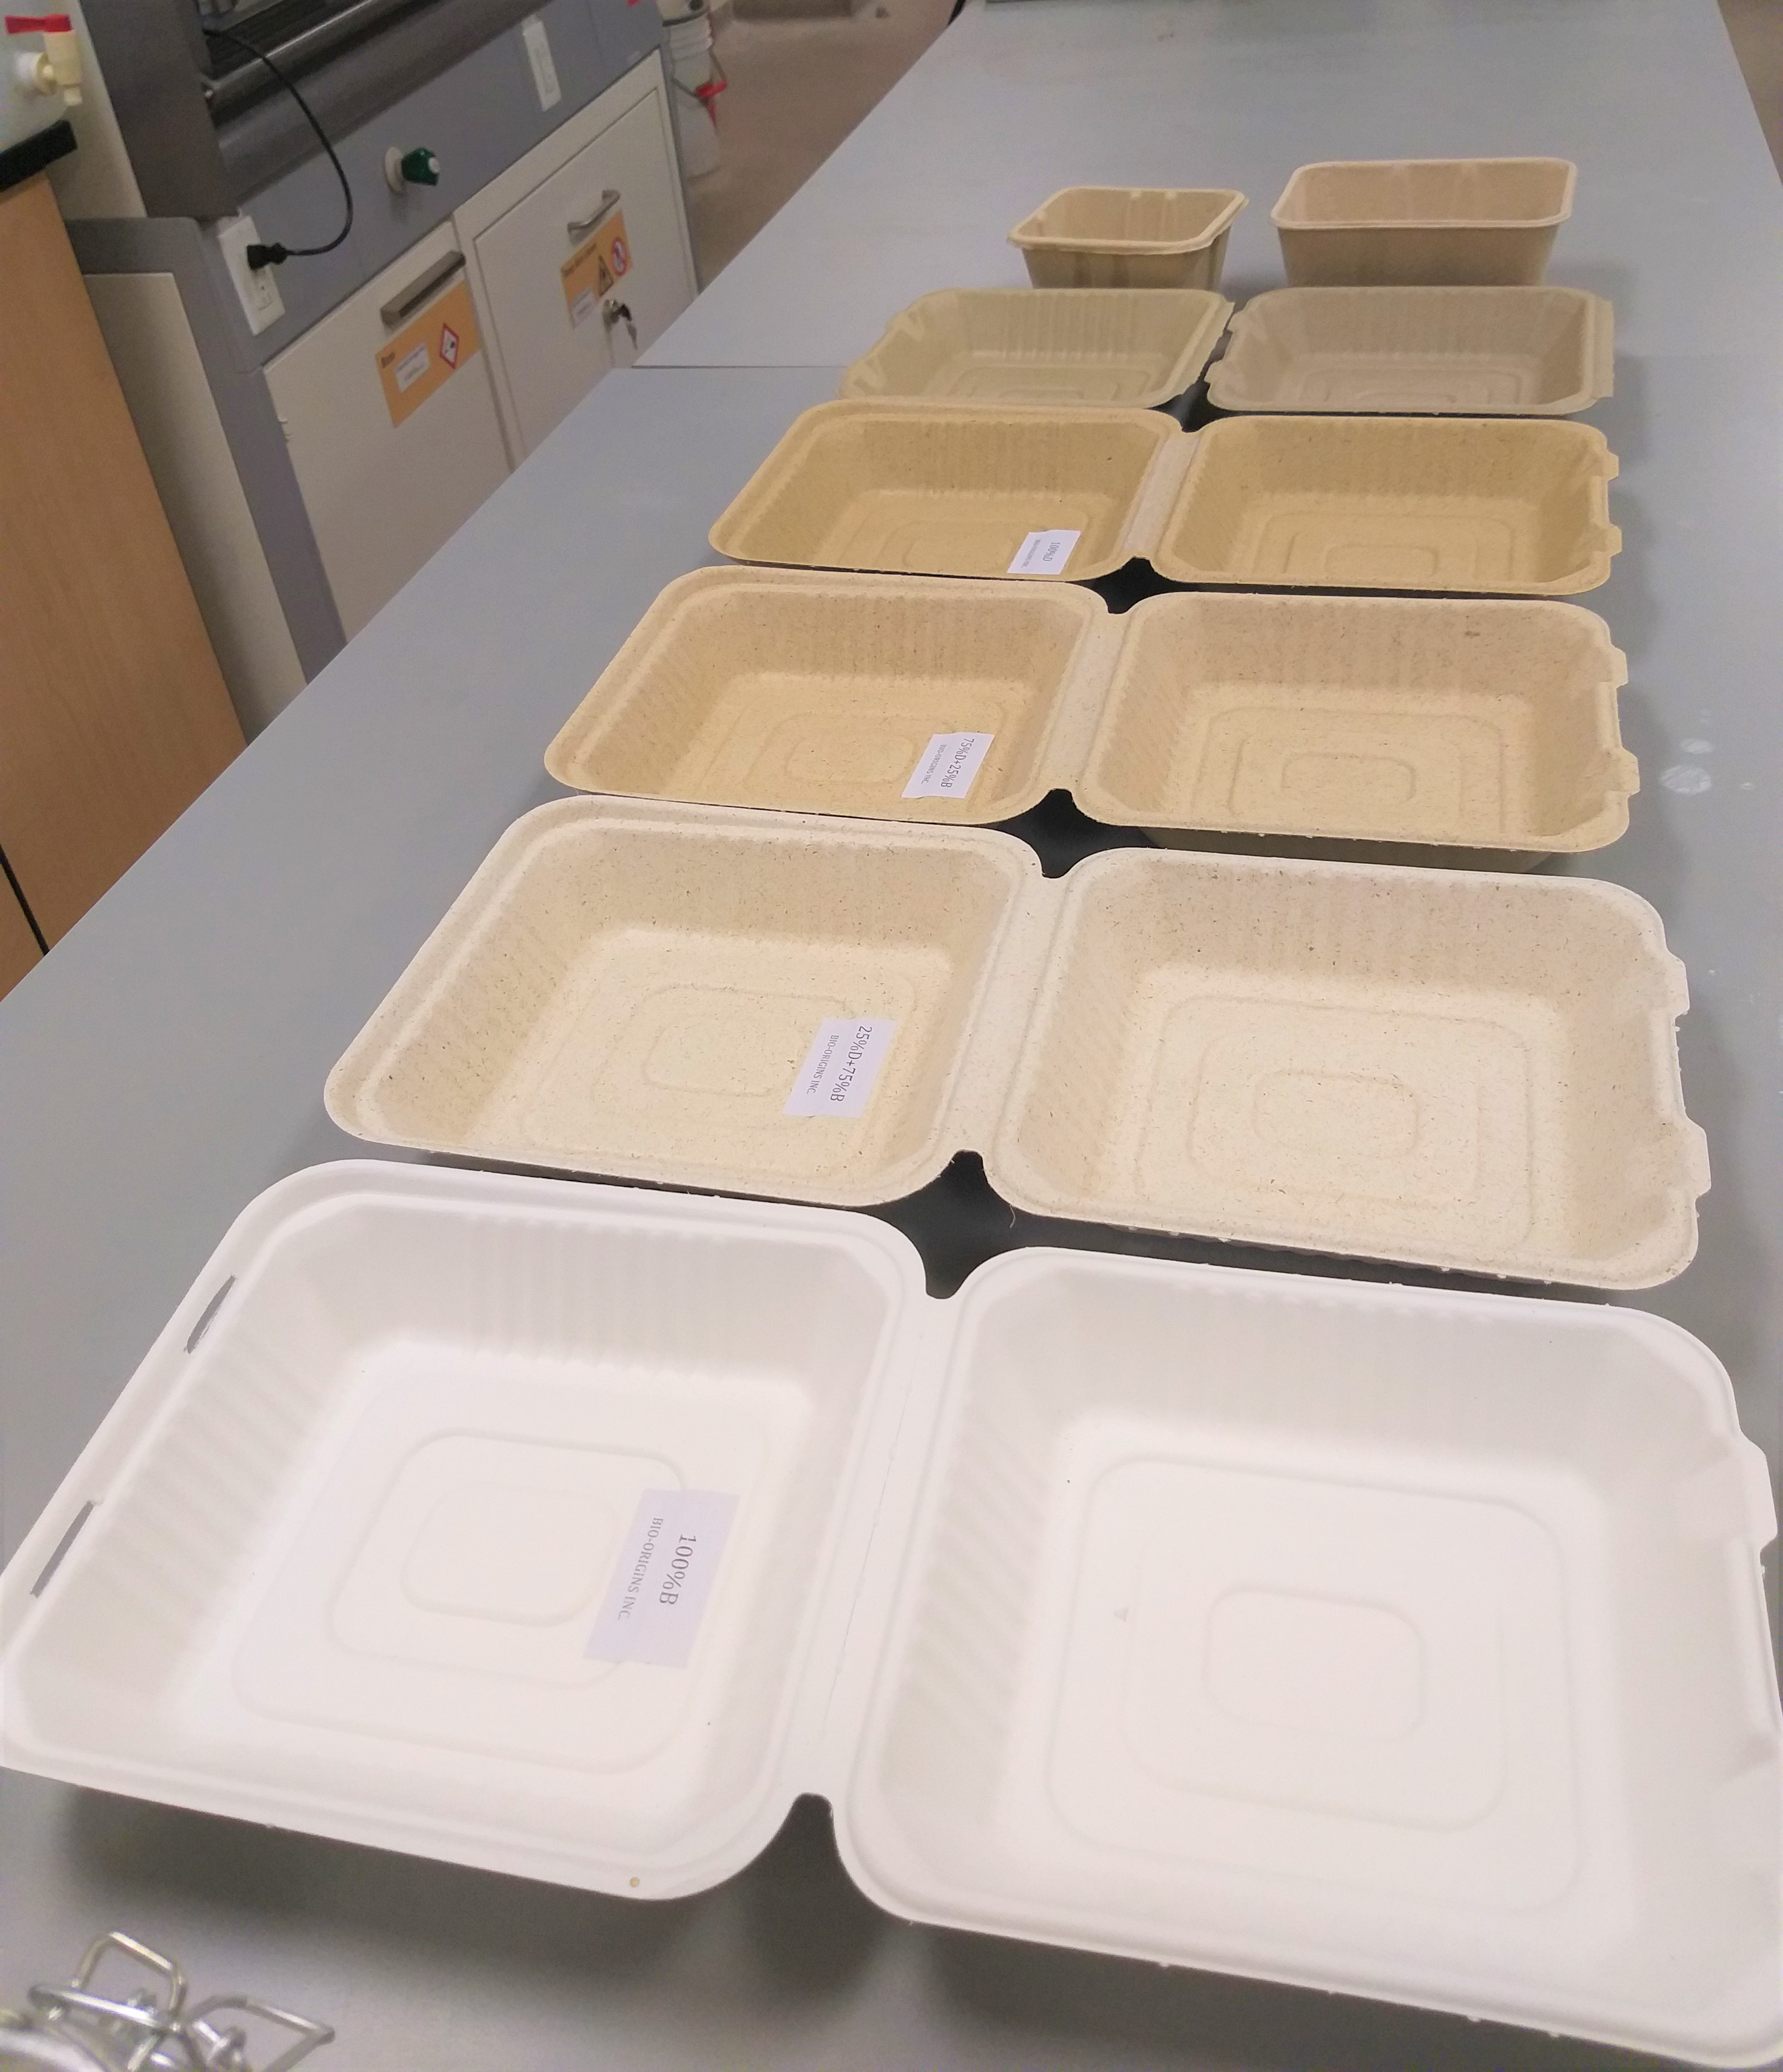 Cardboard food package containers lined up on a table